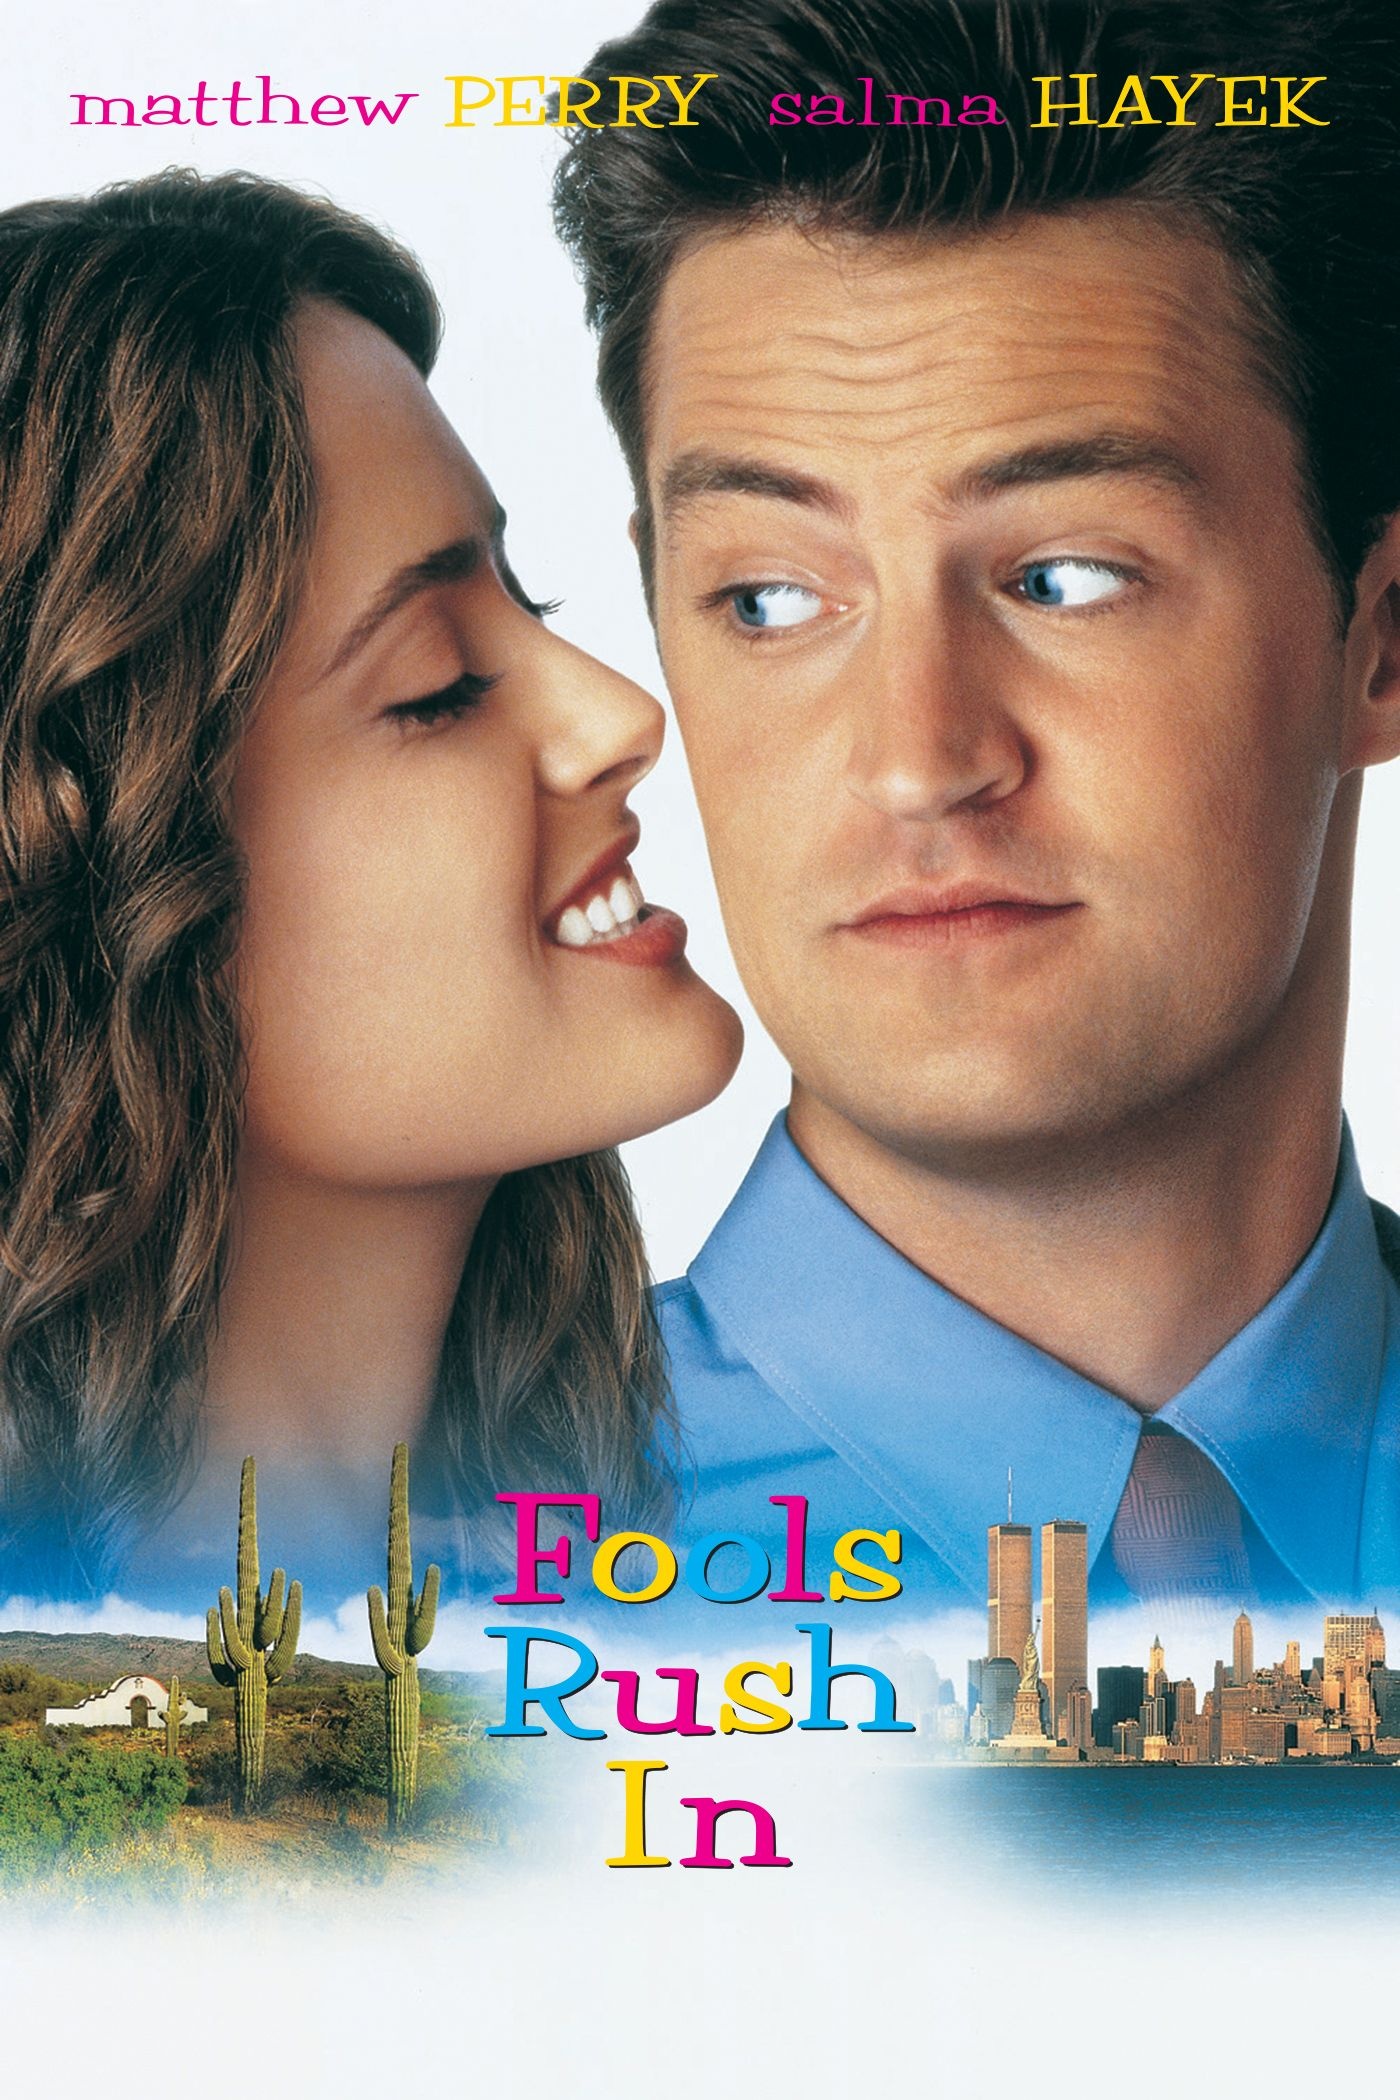 Fools Rush In (Movie): Matthew Perry and Salma Hayek, A New York City architect and a free-spirited photographer. 1400x2100 HD Wallpaper.